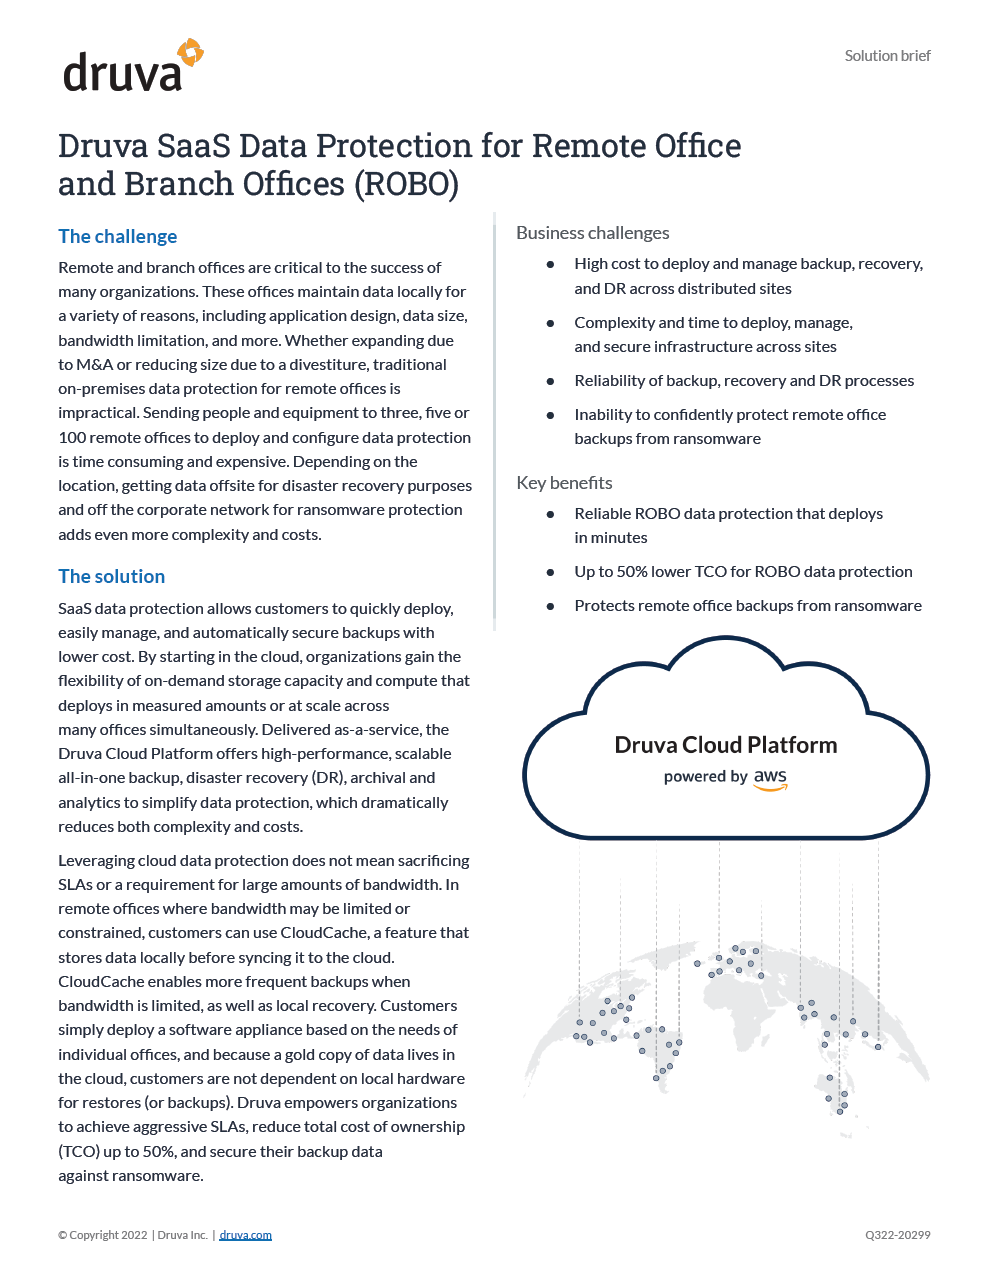 Druva SaaS Data Protection for Remote Office and Branch Offices (ROBO)